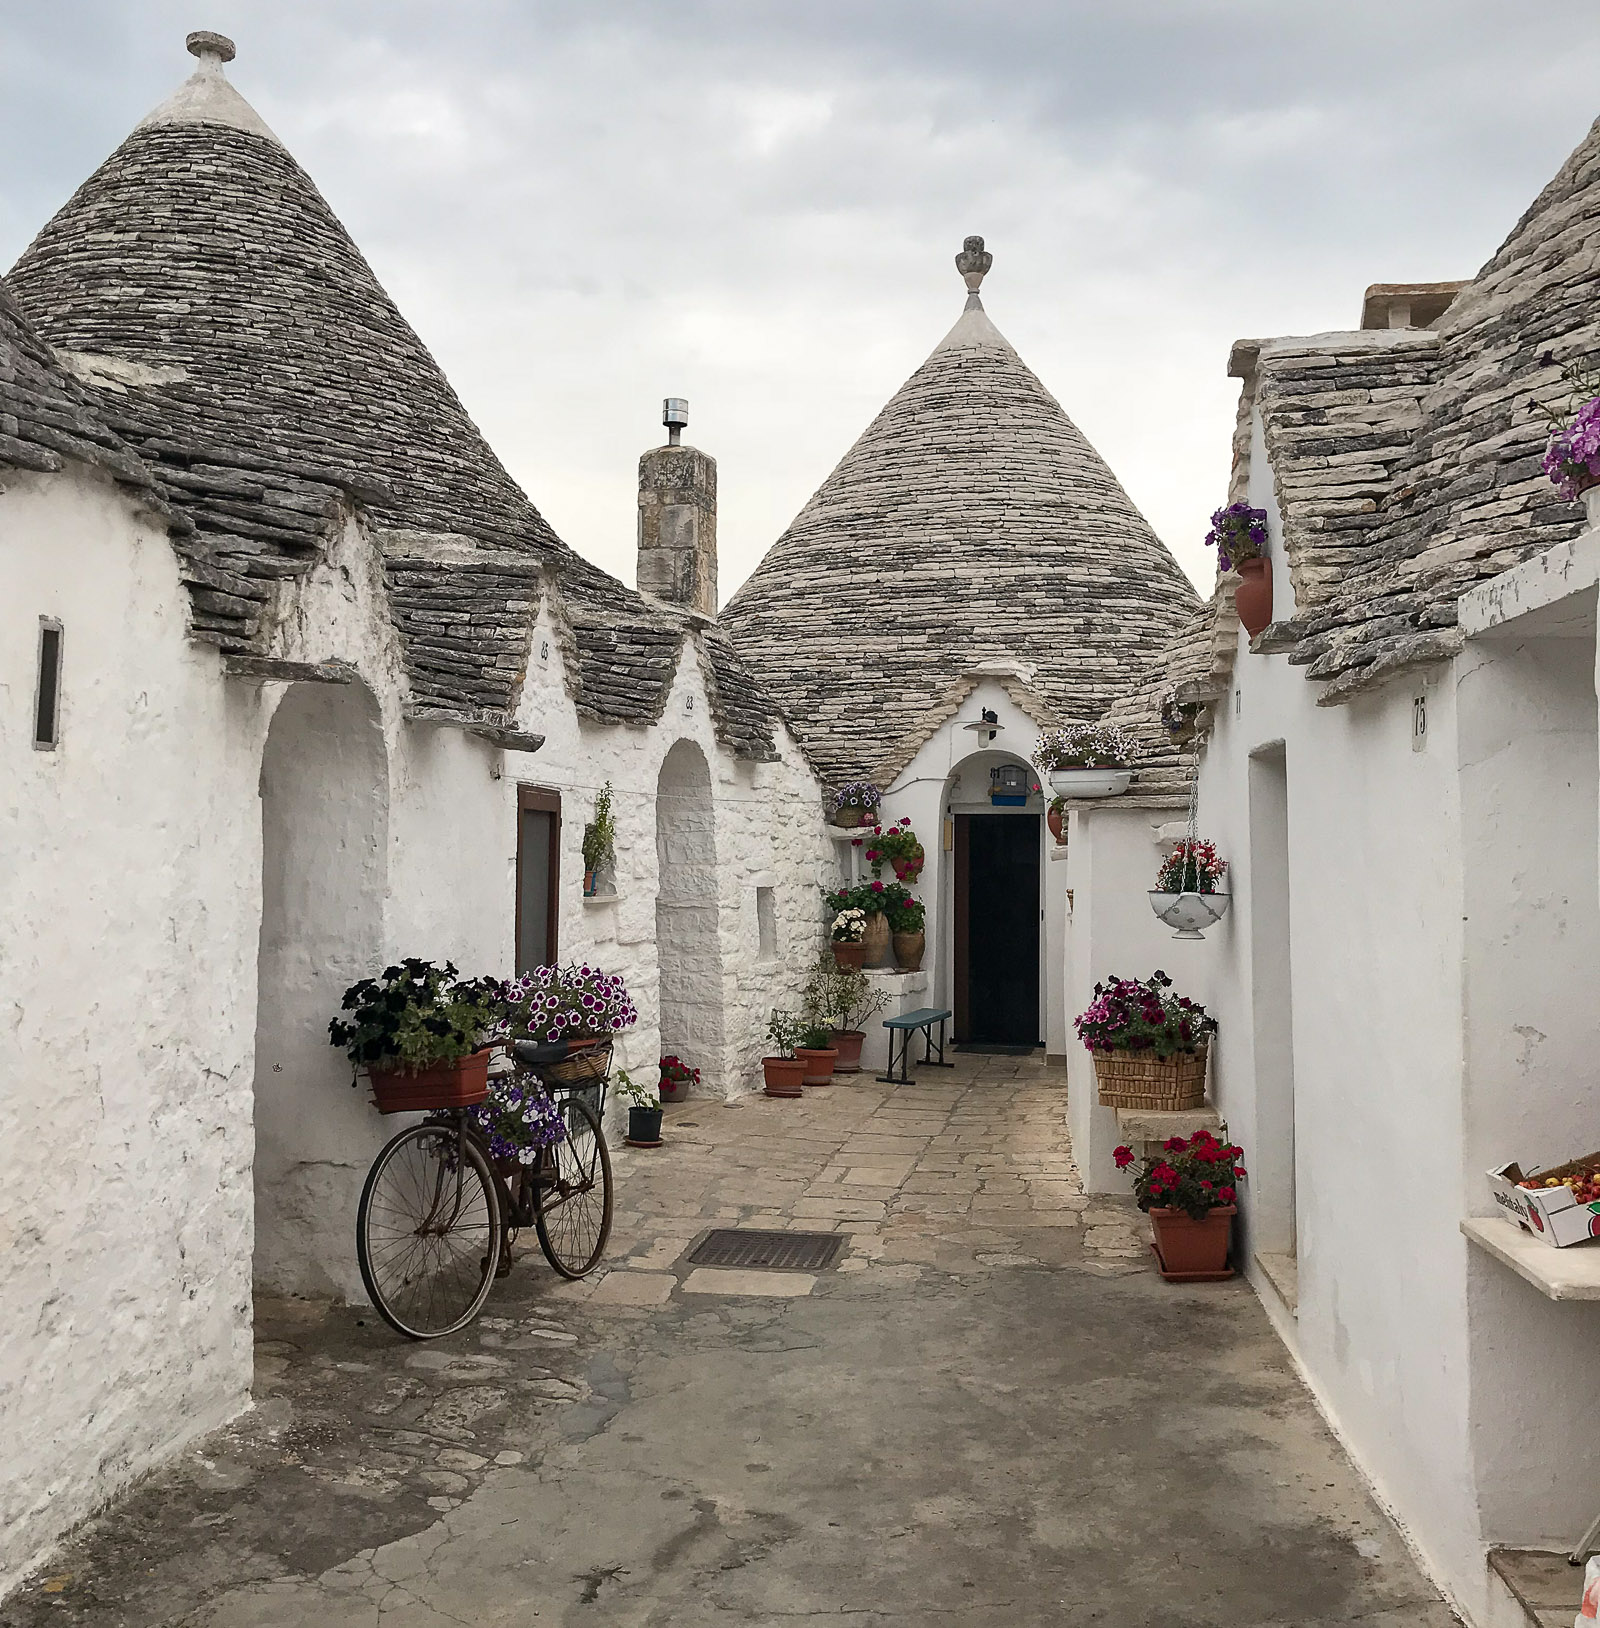 Small houses with cone roofs - Trulli in Alberobello